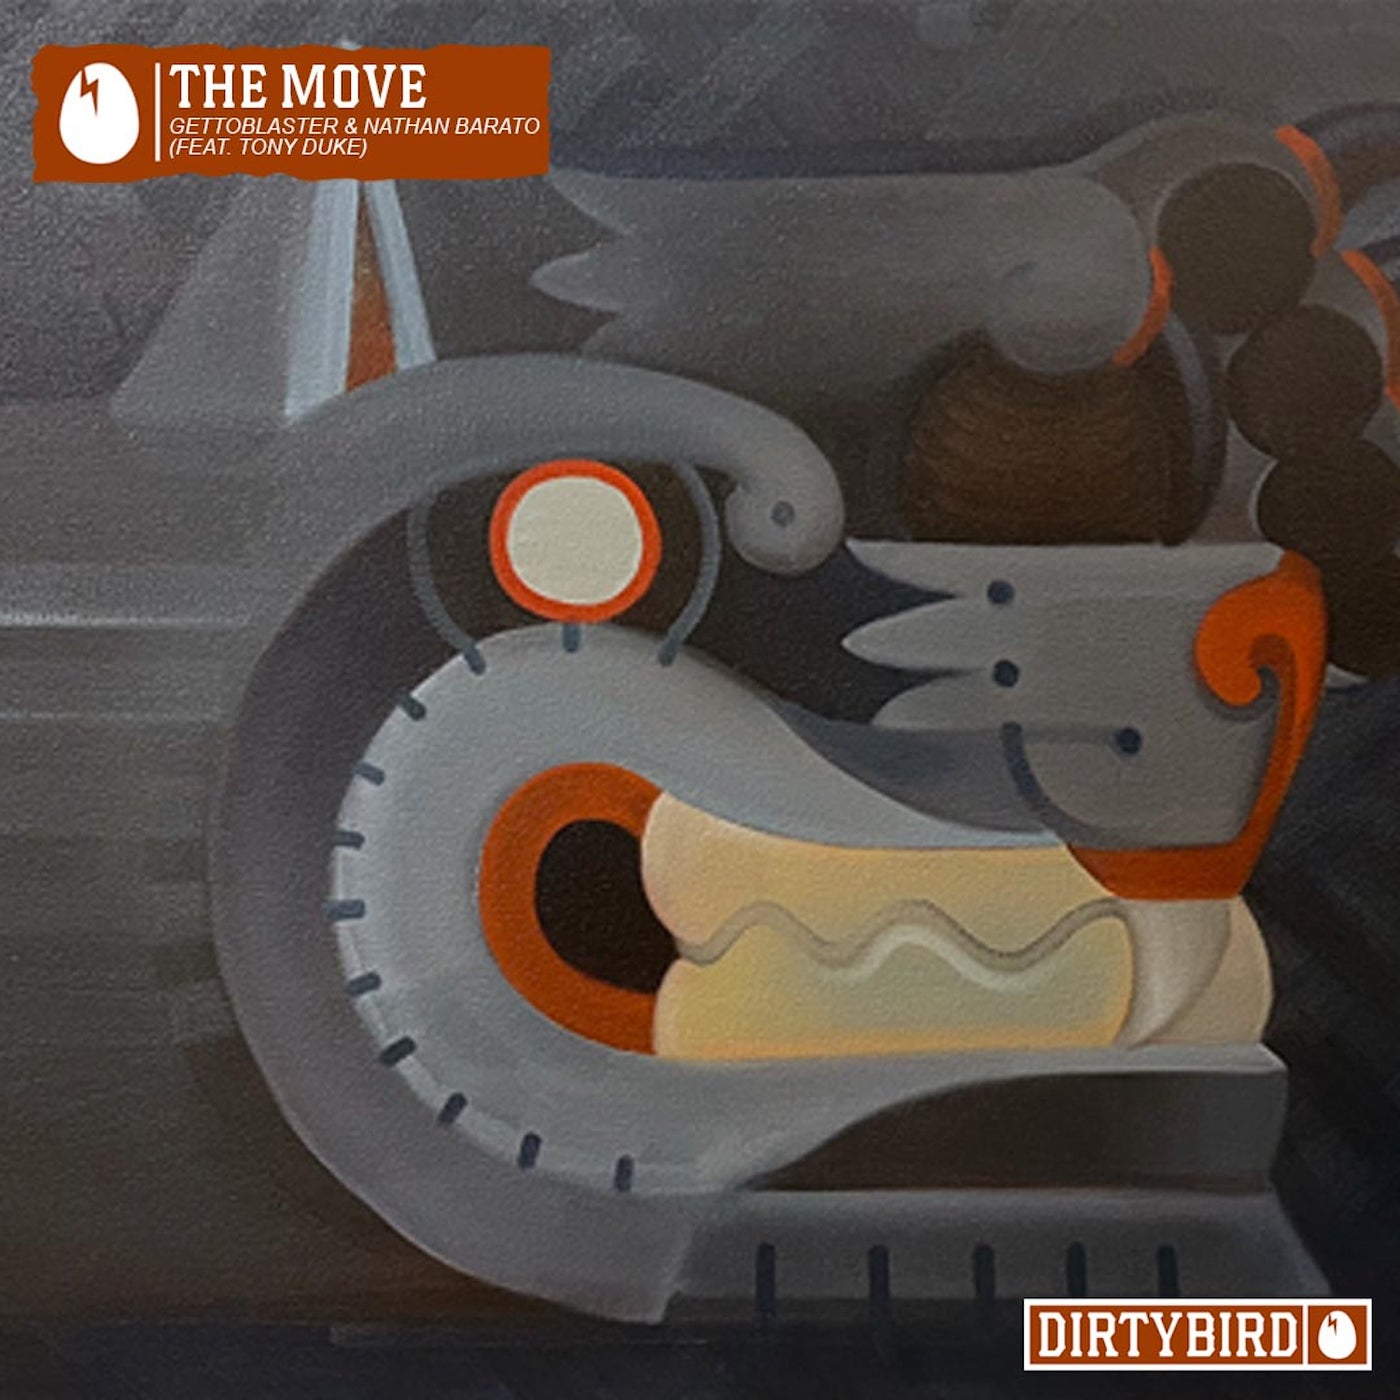 image cover: Nathan Barato, Gettoblaster - The Move (feat. Tony Duke) on DIRTYBIRD